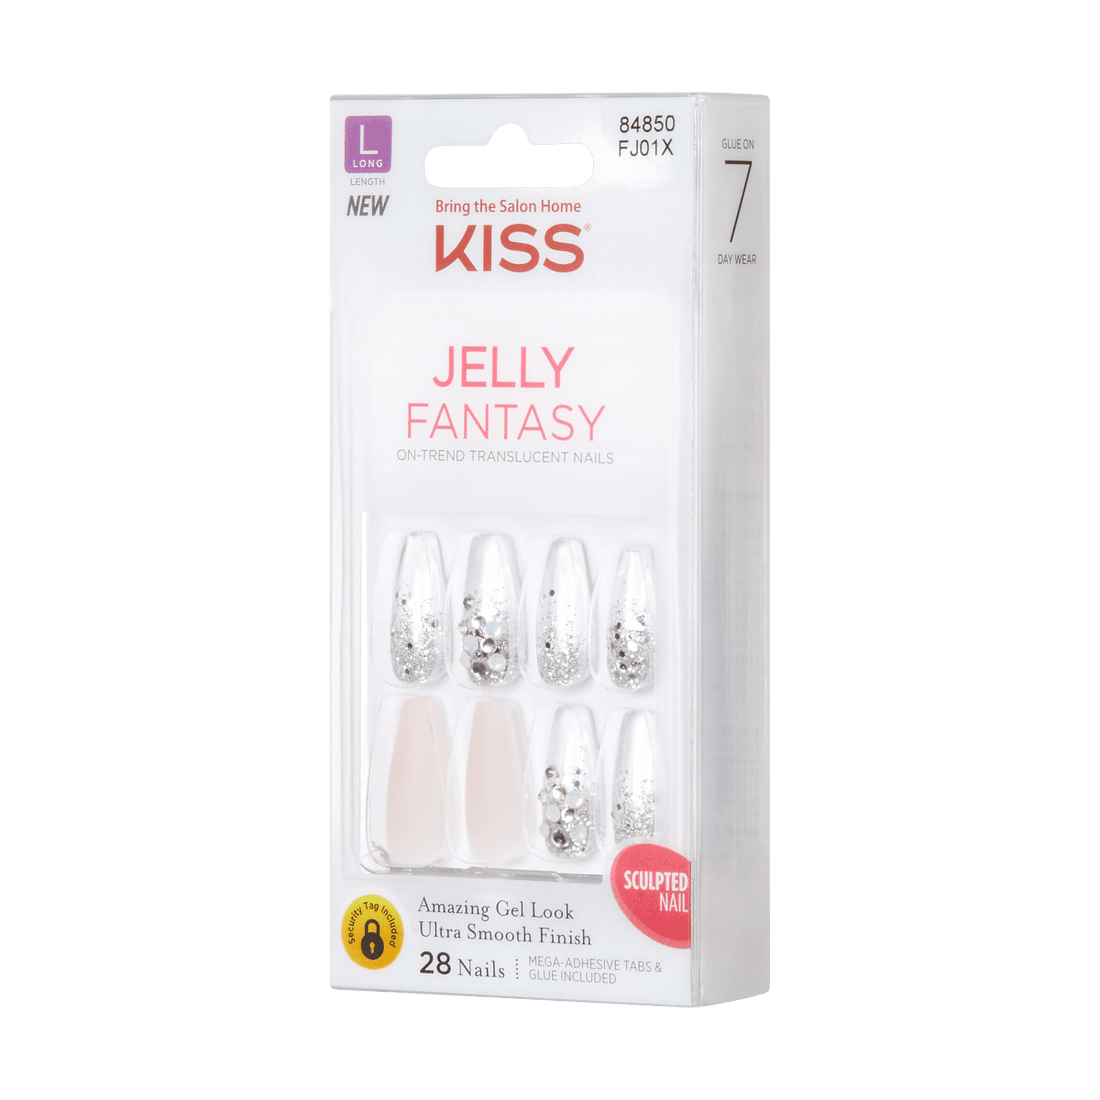 KISS Jelly Fantasy, Press-On Nails, Jelly Bear, Clear, Long Coffin, 28ct